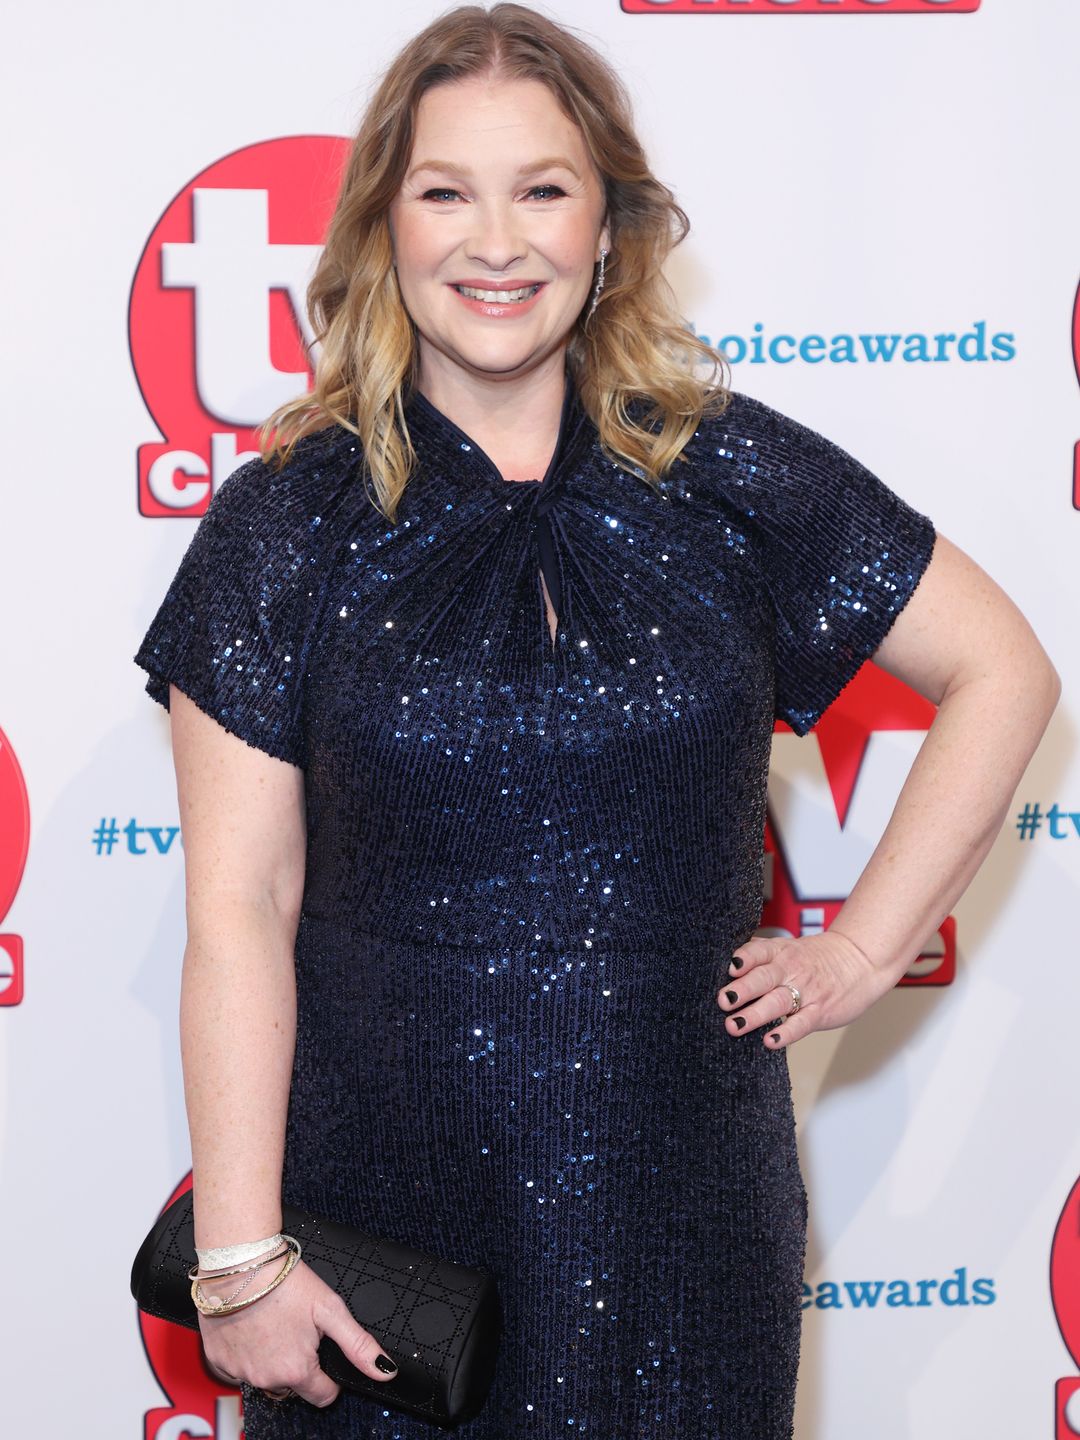 Joanna Page in a glittery dress at the TV Choice Awards